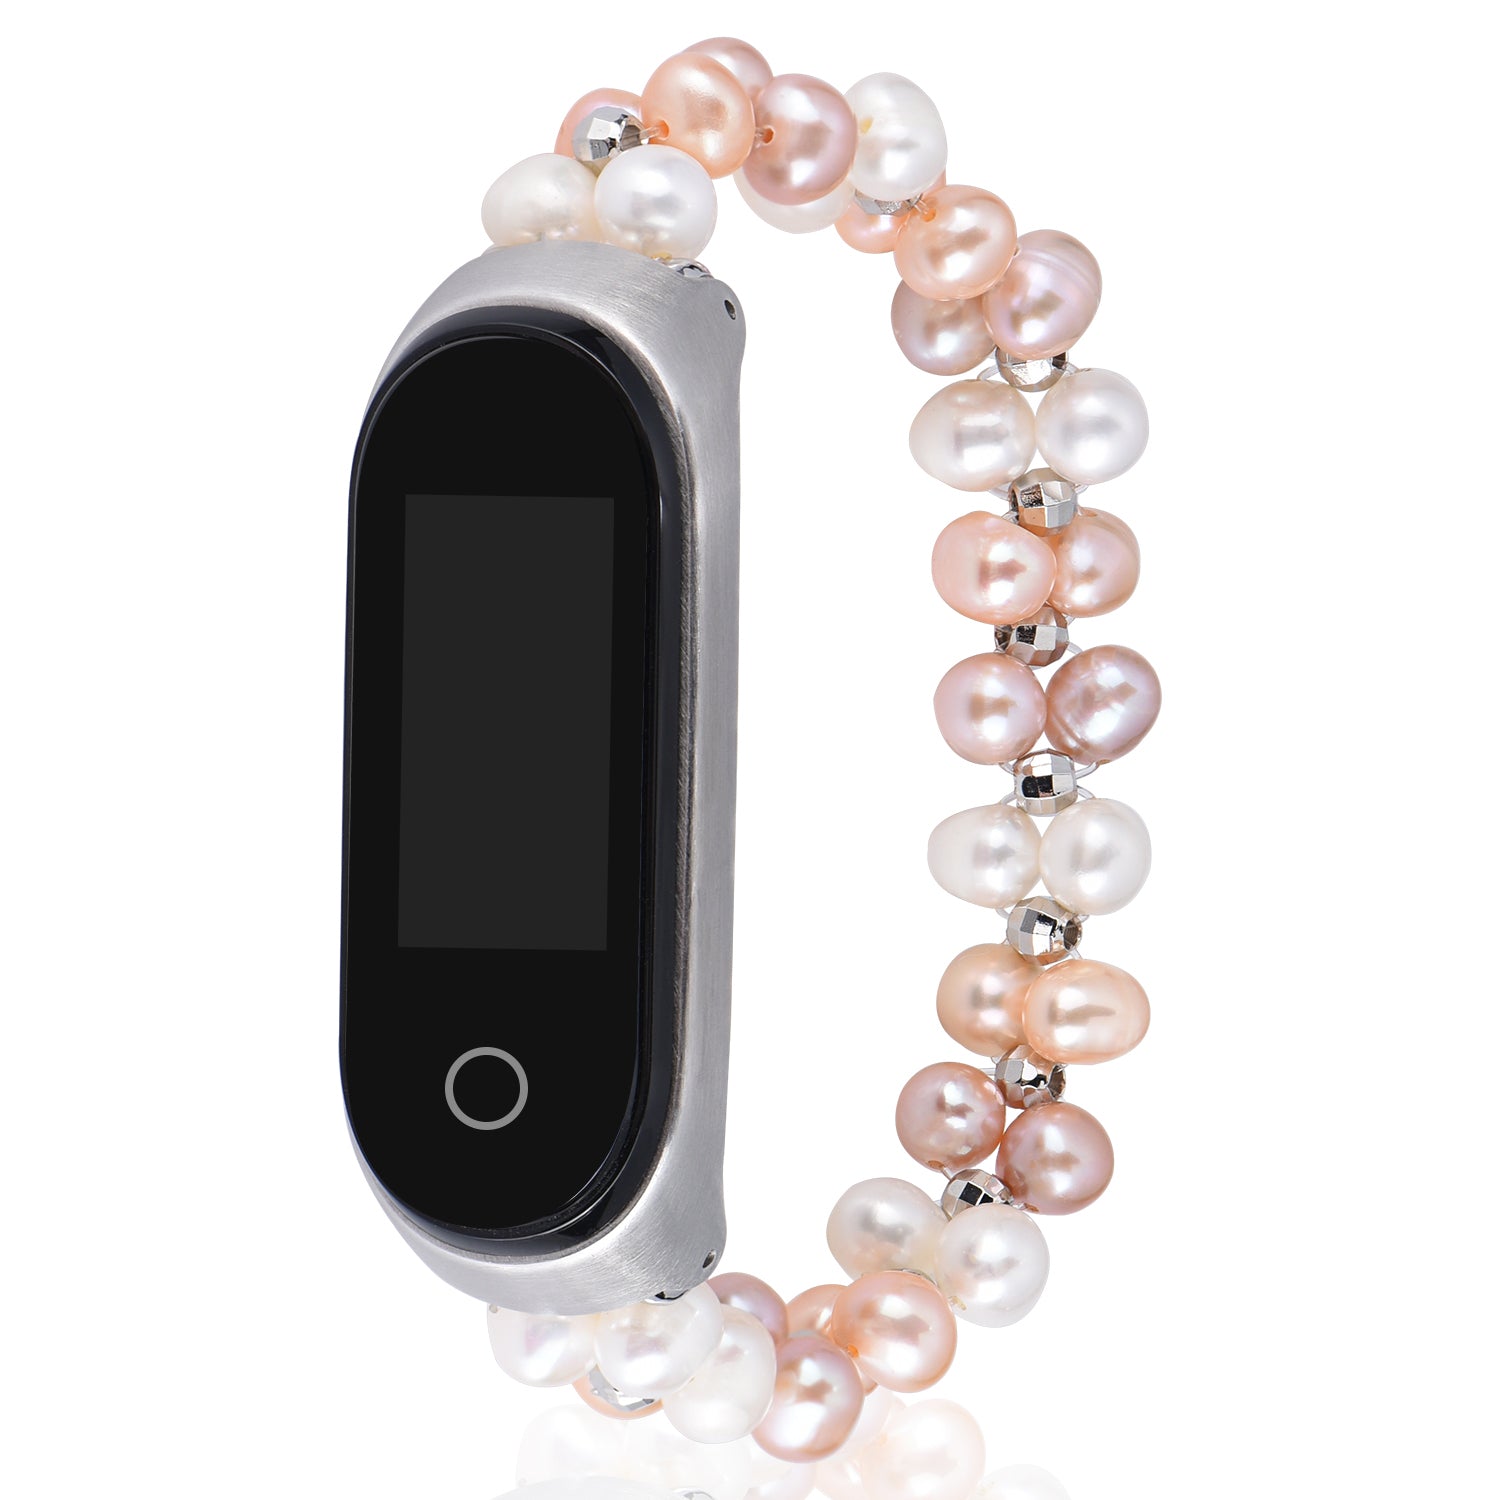 For Xiaomi Mi Band 3/4 Replacement Pearls Bracelet Watch Strap Wrist Band - Colorful